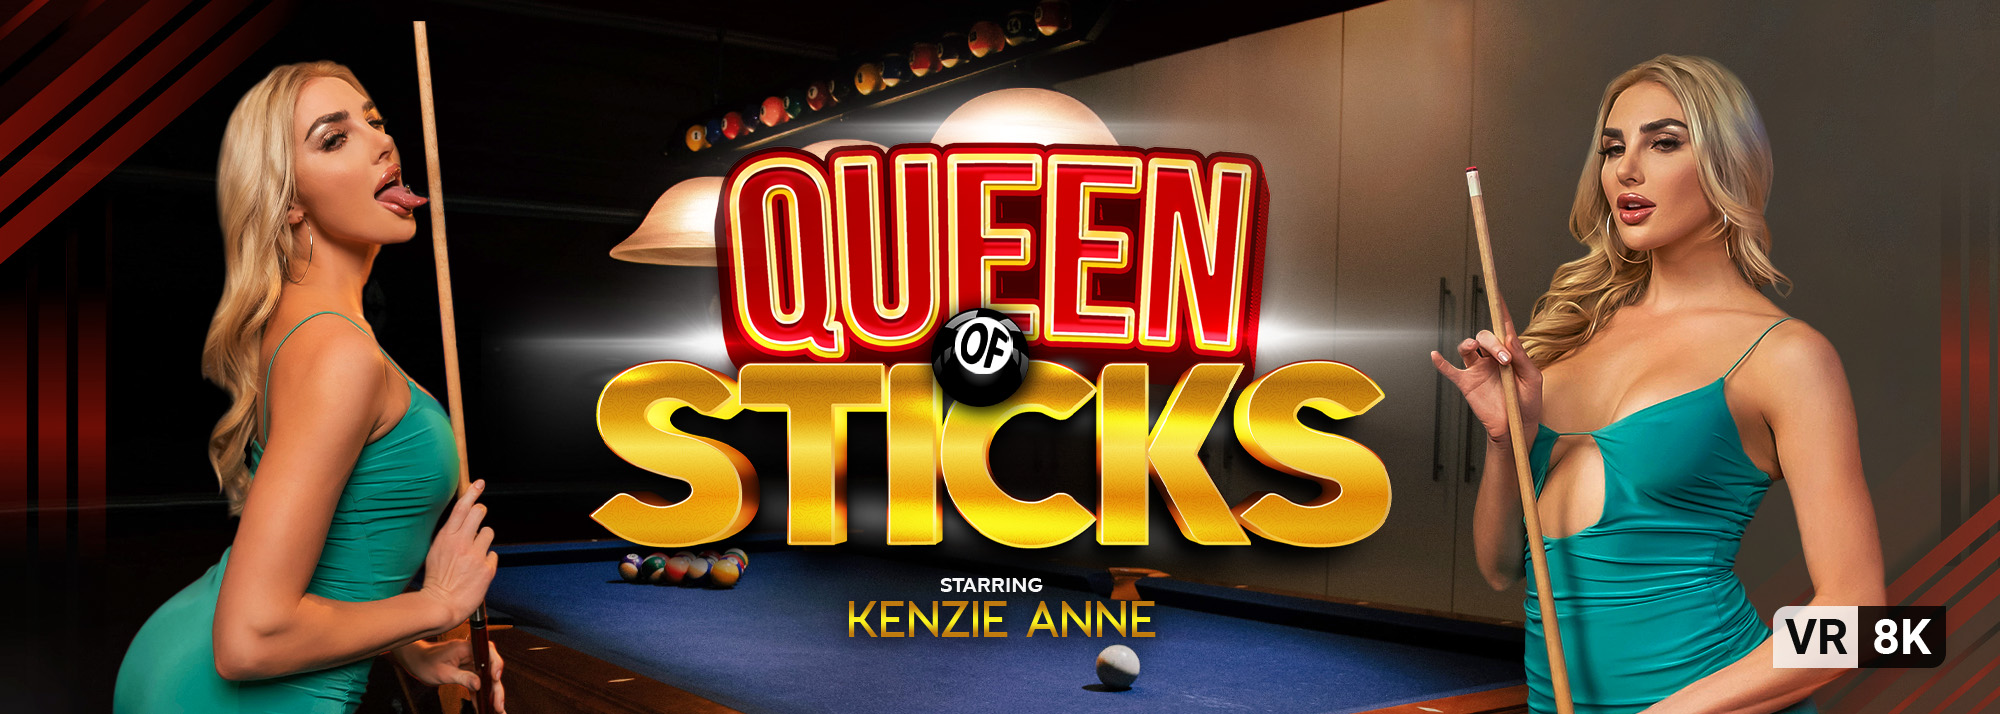 Queen of Sticks with Kenzie Anne for VR Bangers site